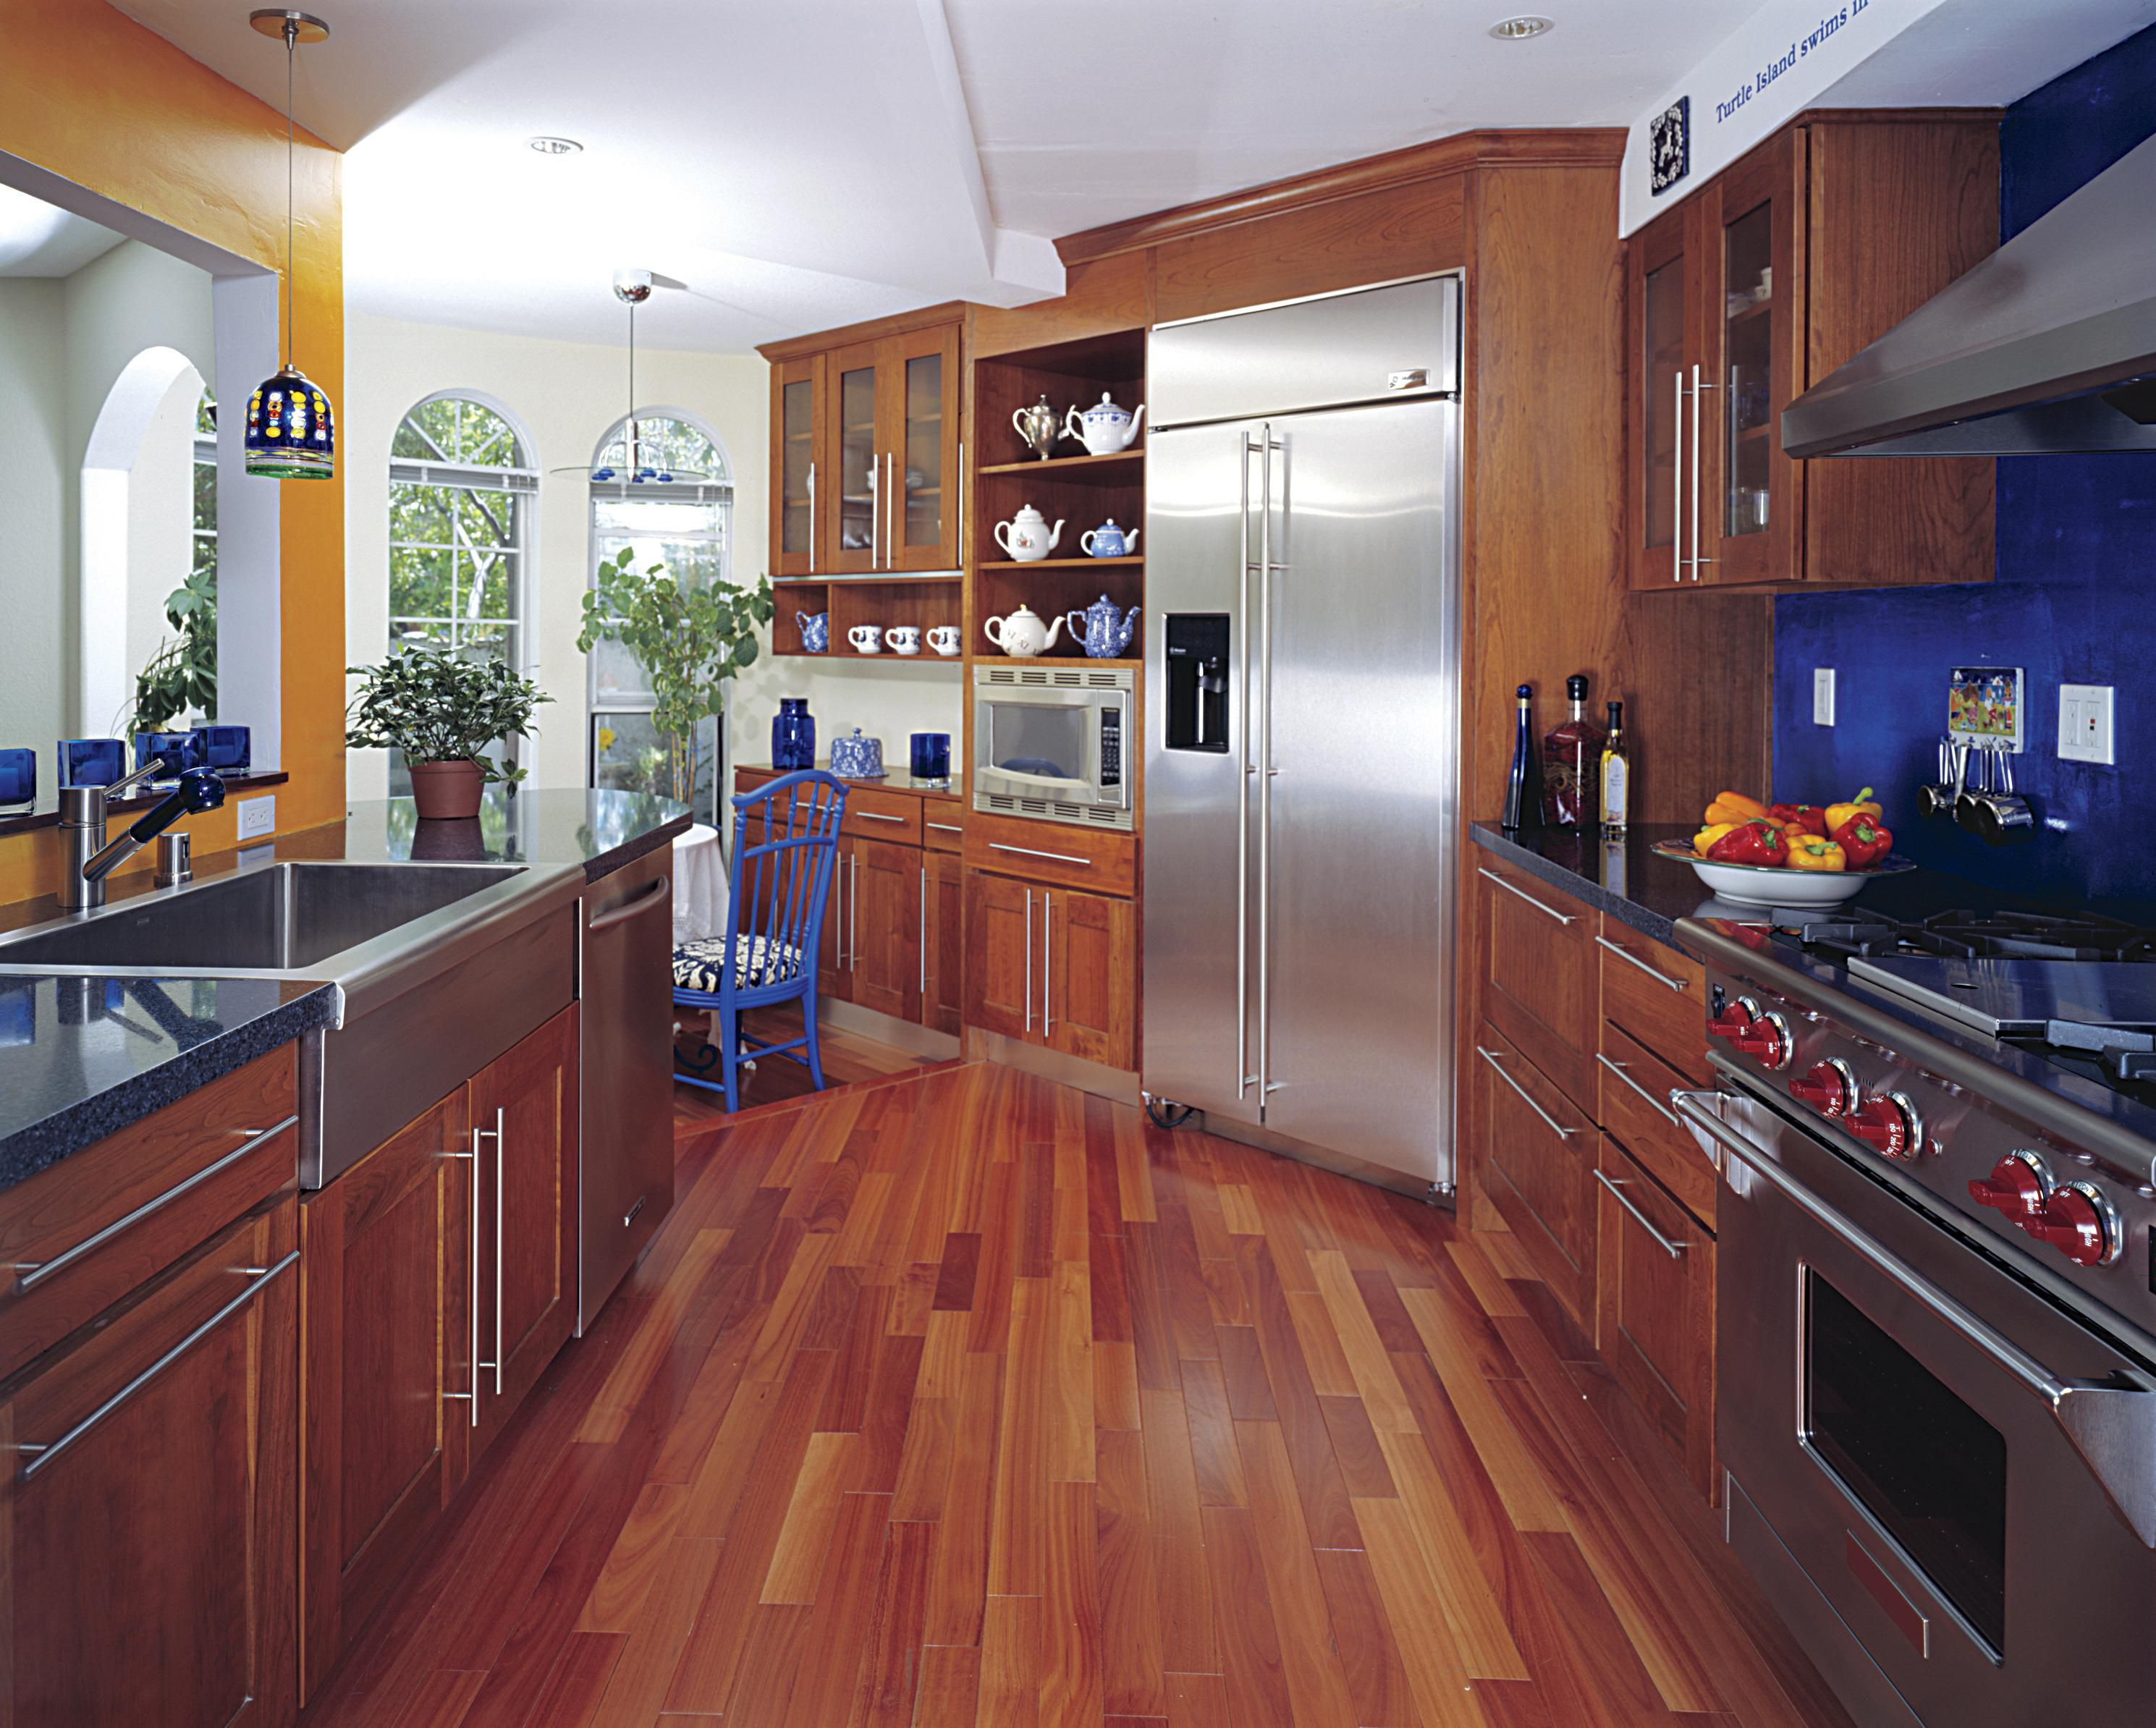 19 Perfect Unfinished or Finished Hardwood Flooring 2024 free download unfinished or finished hardwood flooring of hardwood floor in a kitchen is this allowed within 186828472 56a49f3a5f9b58b7d0d7e142